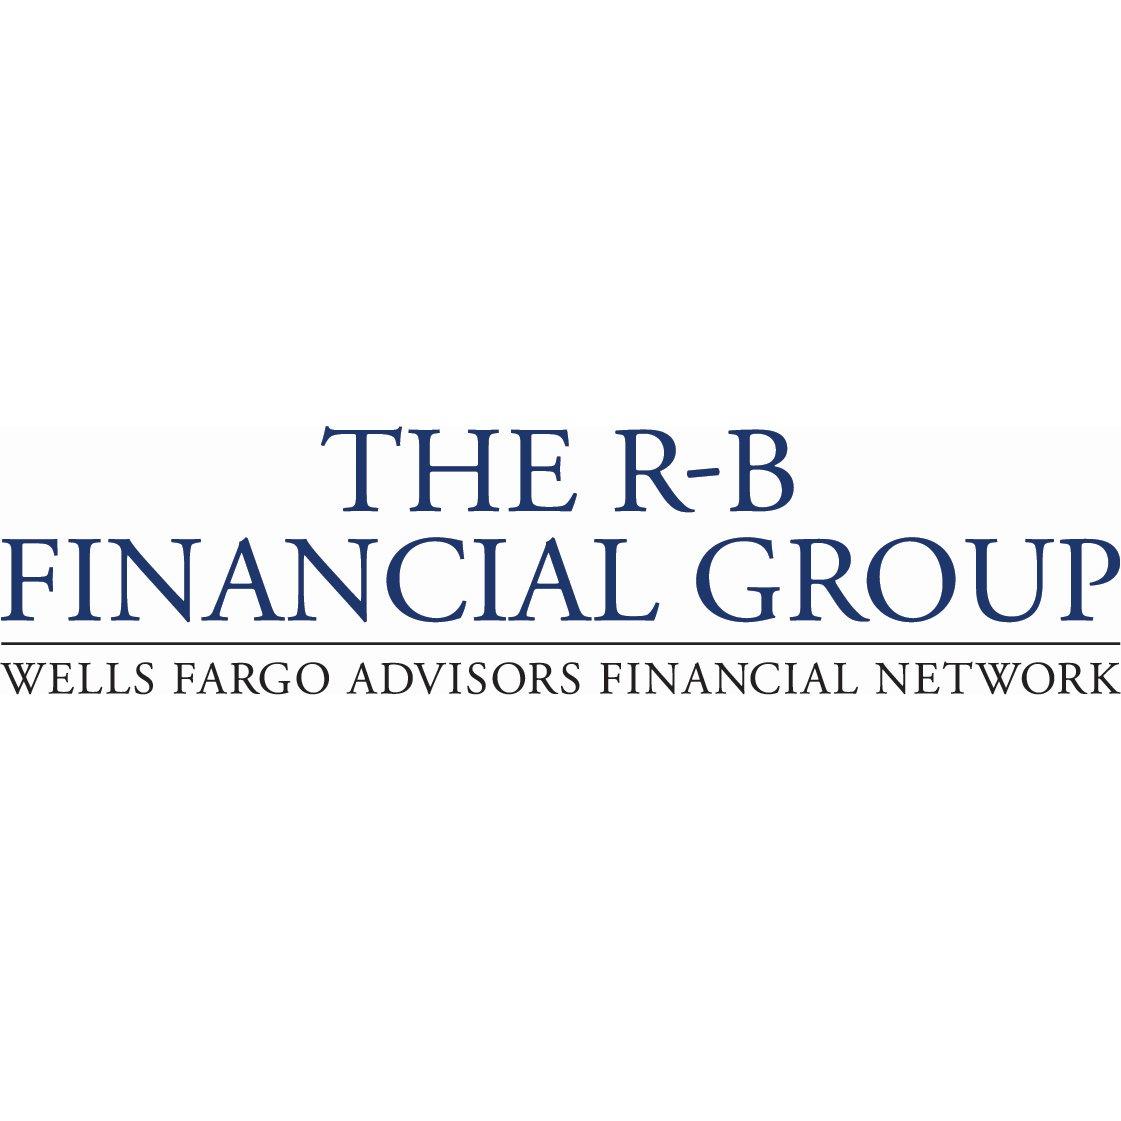 The R-B Financial Group